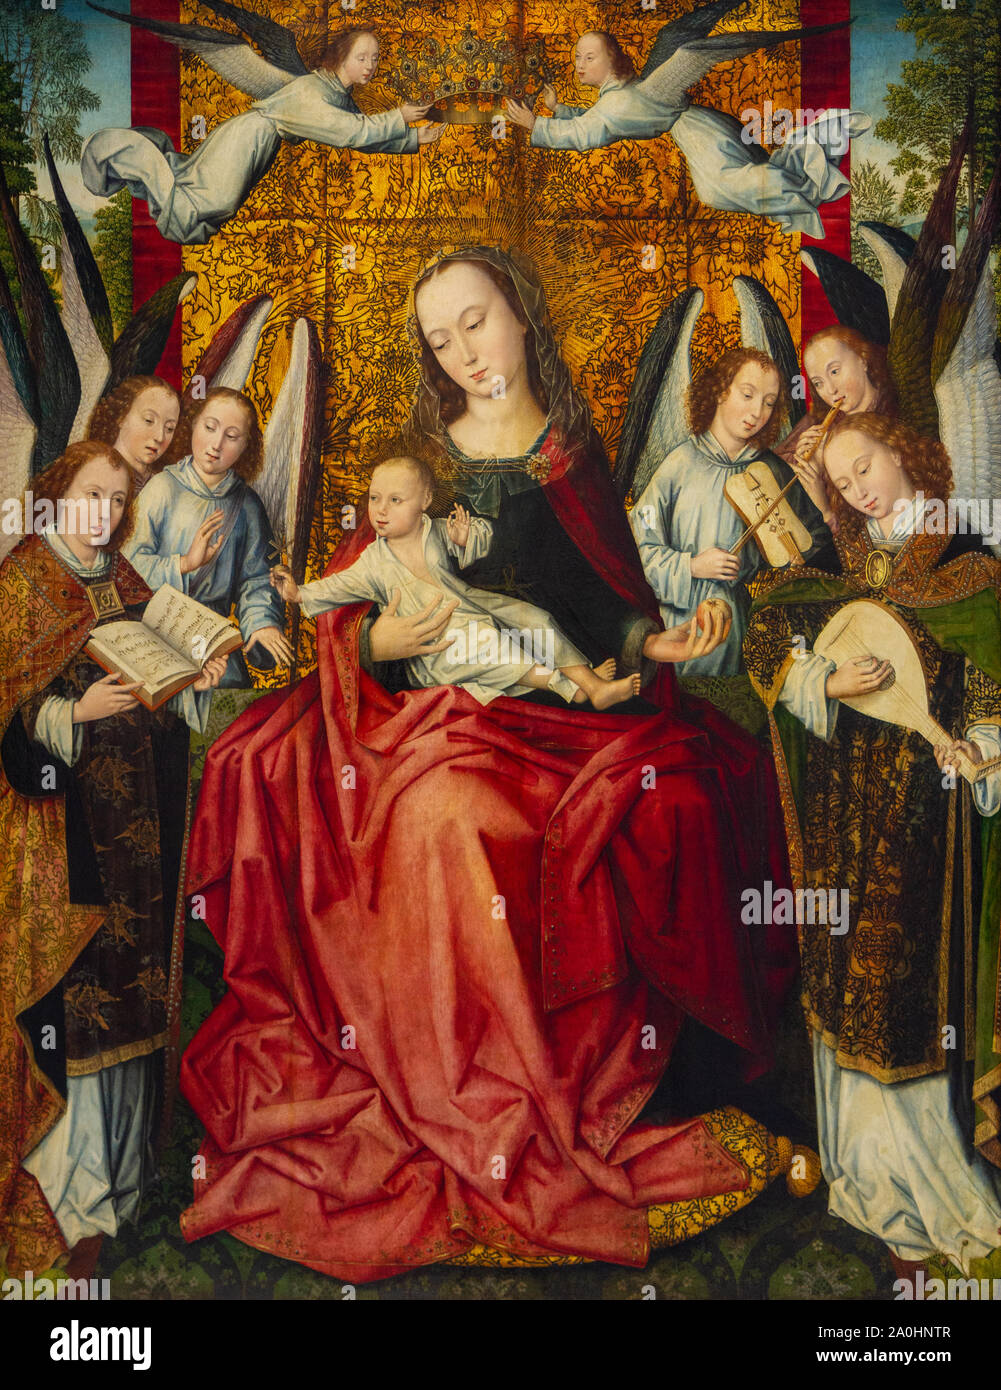 Virgin Mary with Infant Jesus surrounded by angels singing and playing instruments. The Louvre Museum in Lens, France. Stock Photo